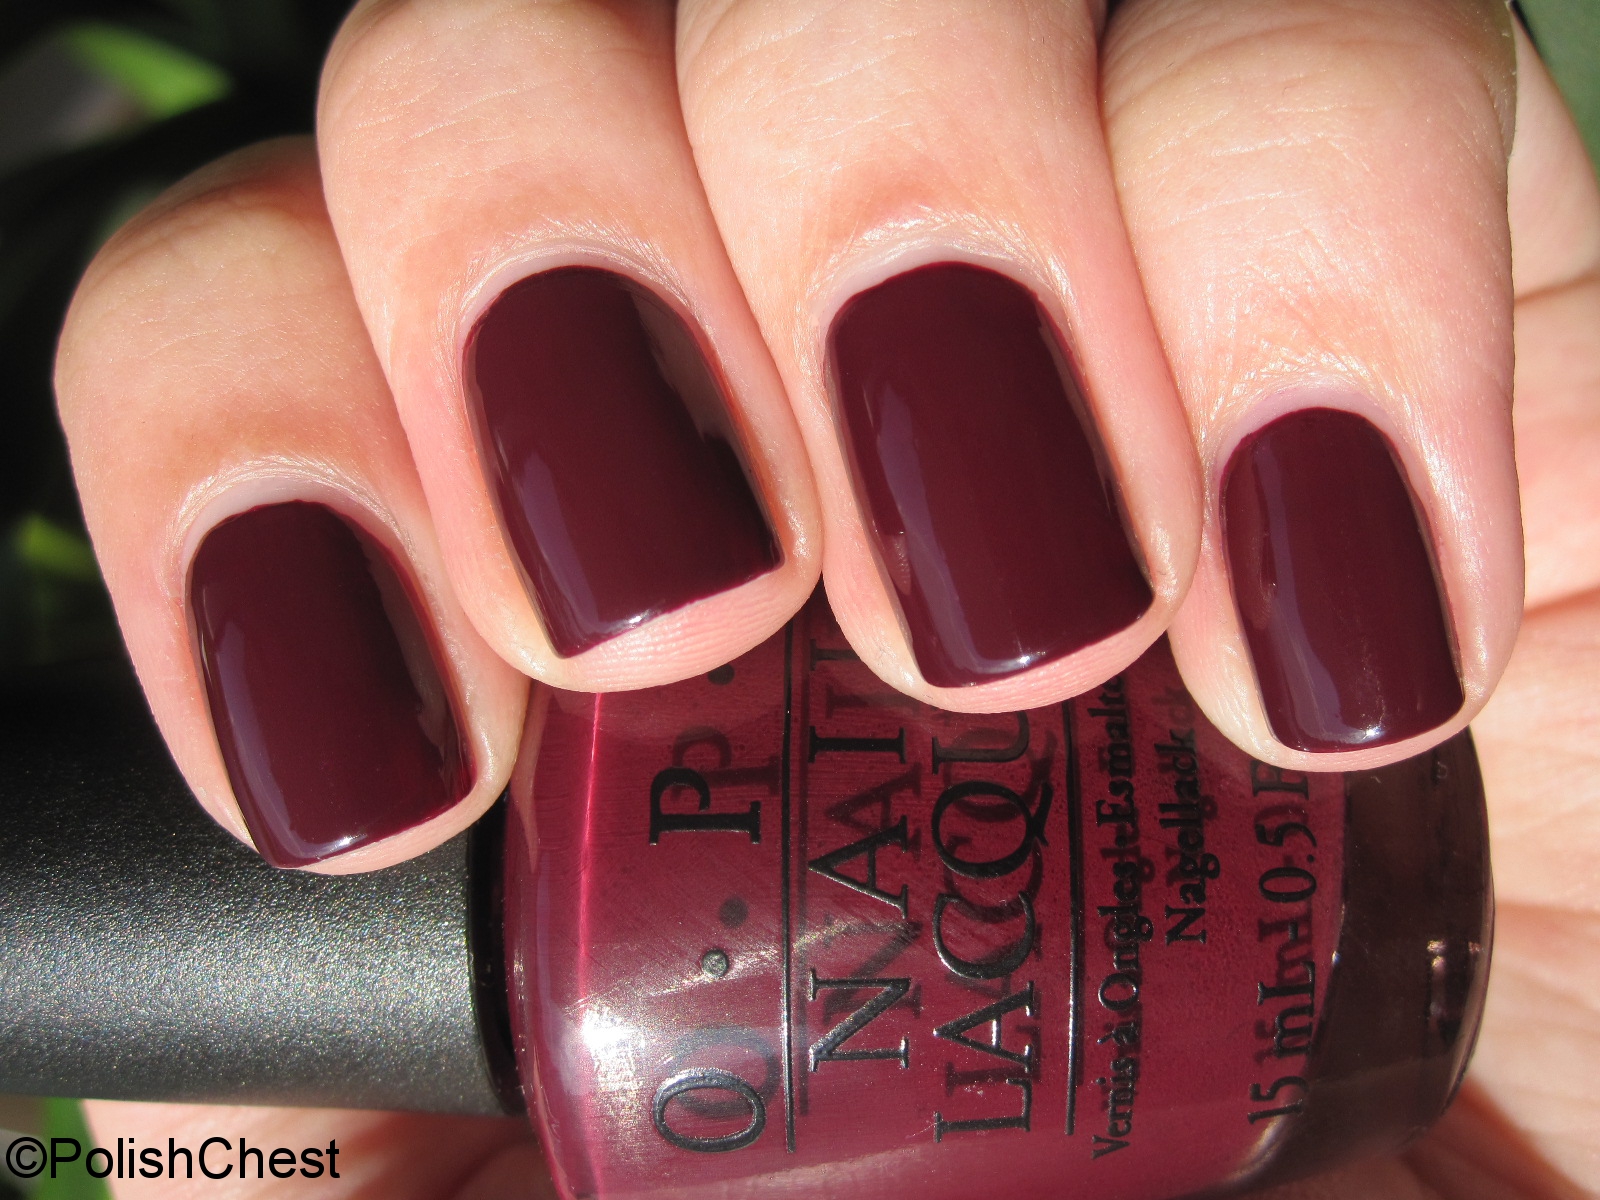 Polish Chest: OPI - Mrs. O'Leary's BBQ